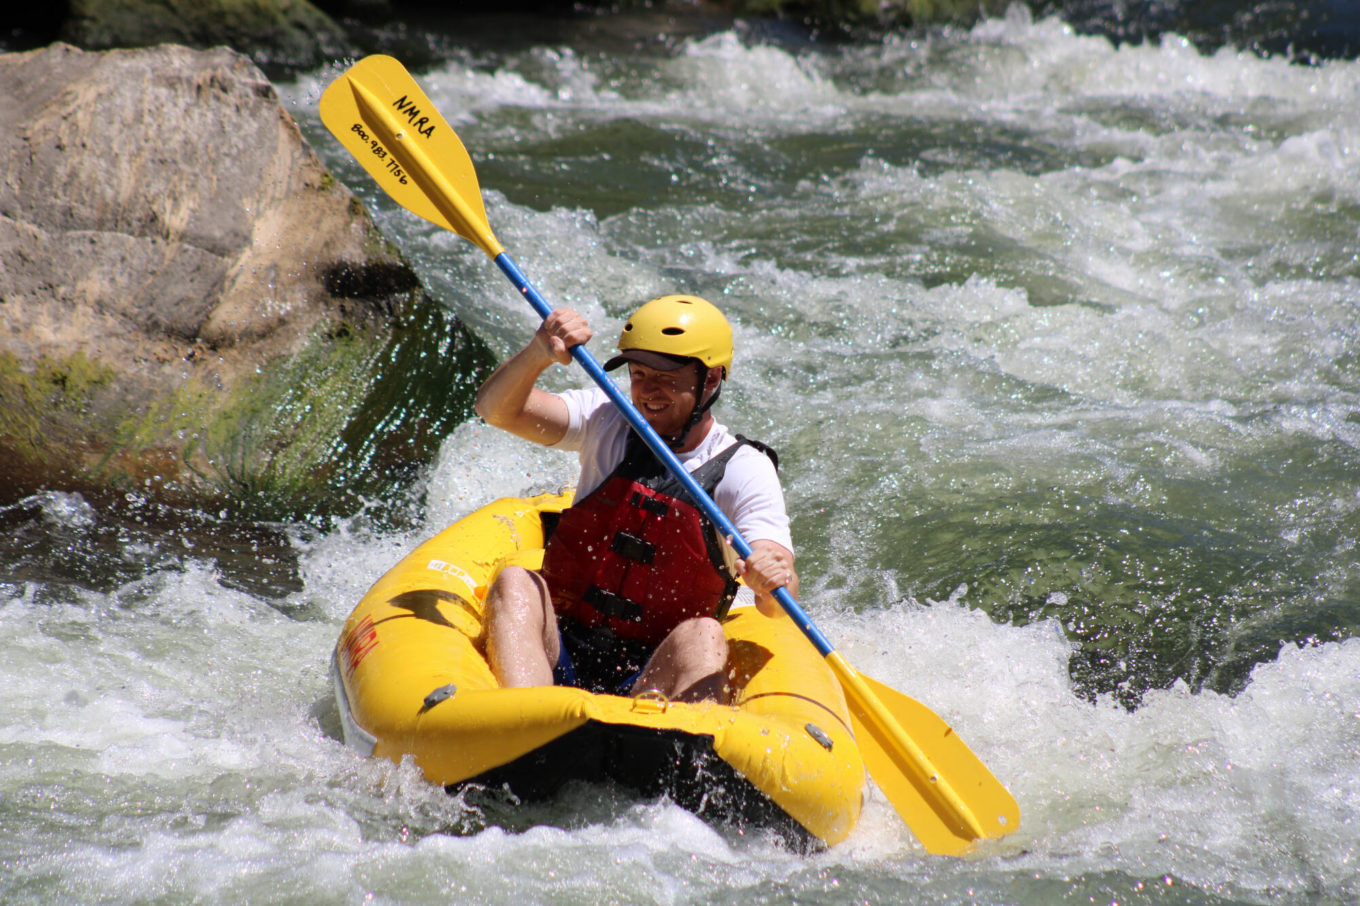 Taos Box inflatable Kayaking guided trip in new mexico